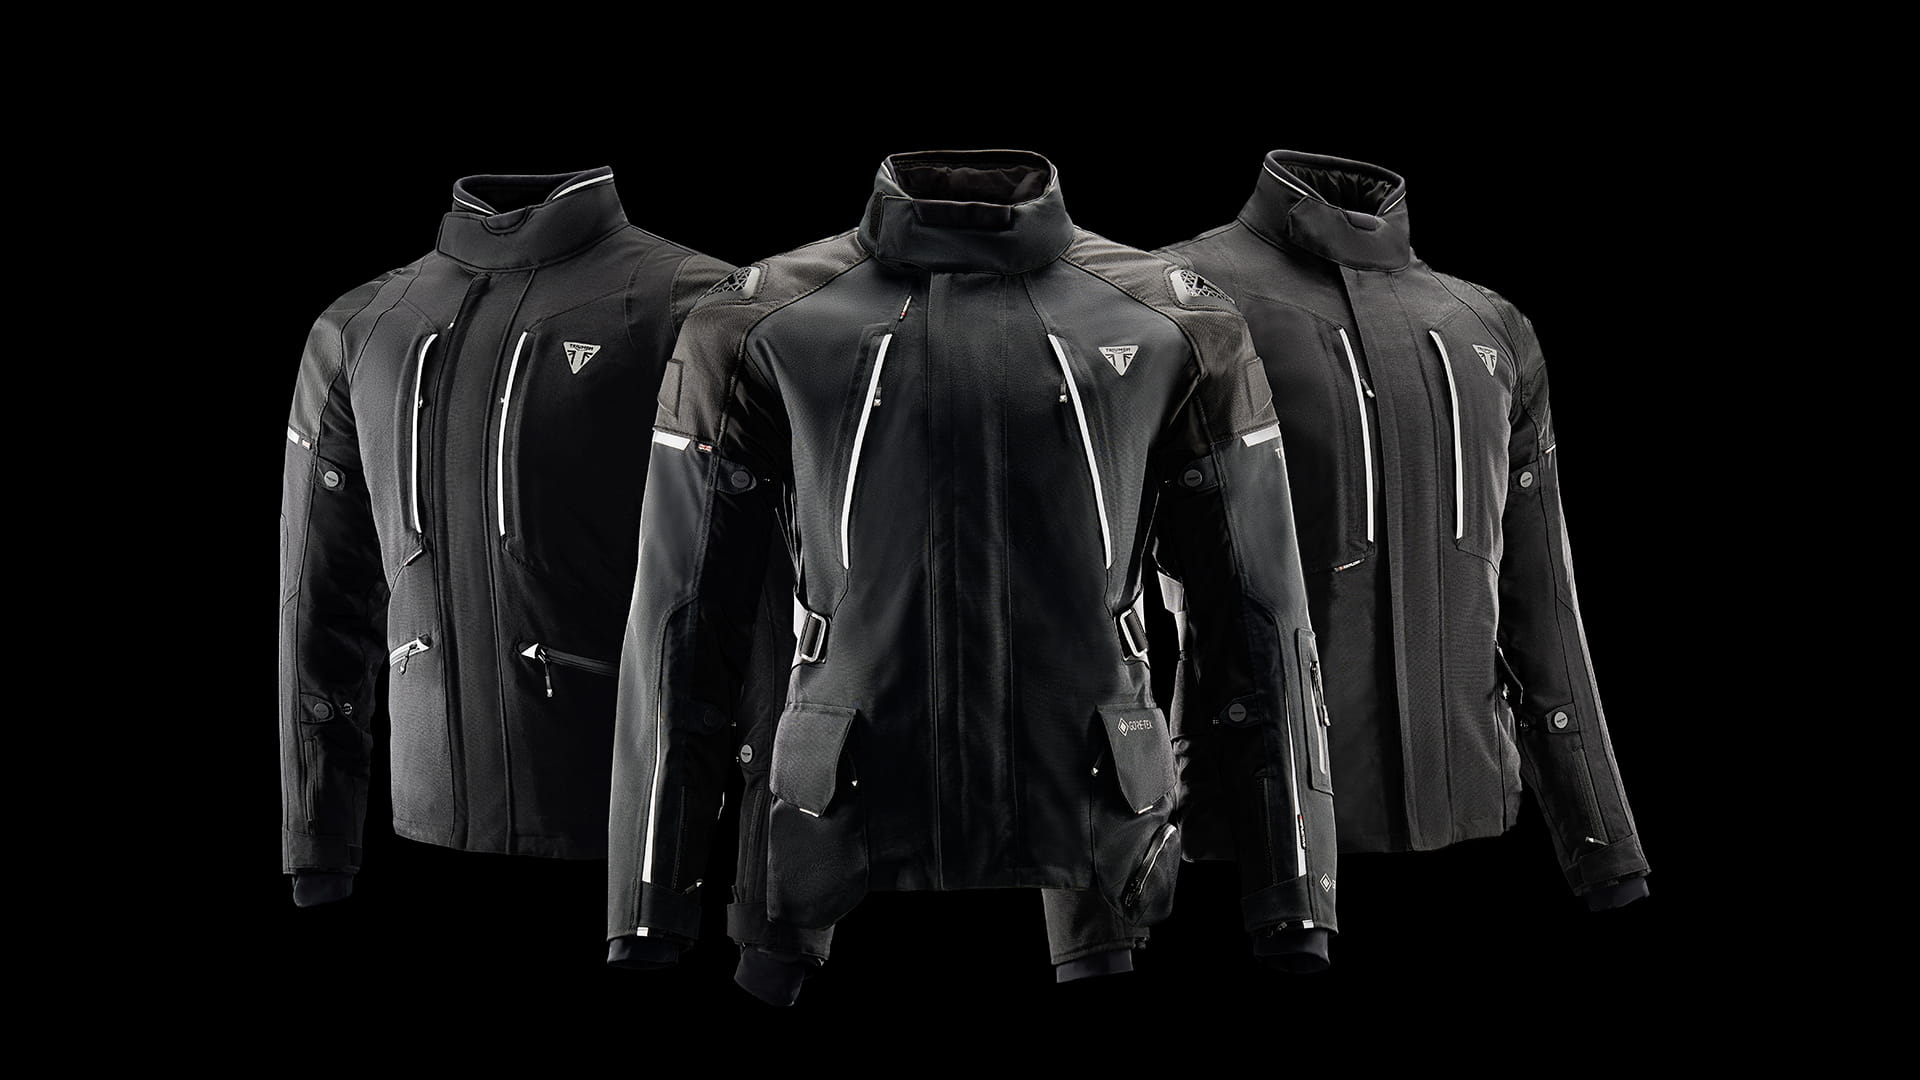 Triumph Motorcycles Clothing Adventure Touring Affix Series Jacket Group Shot on Black Background